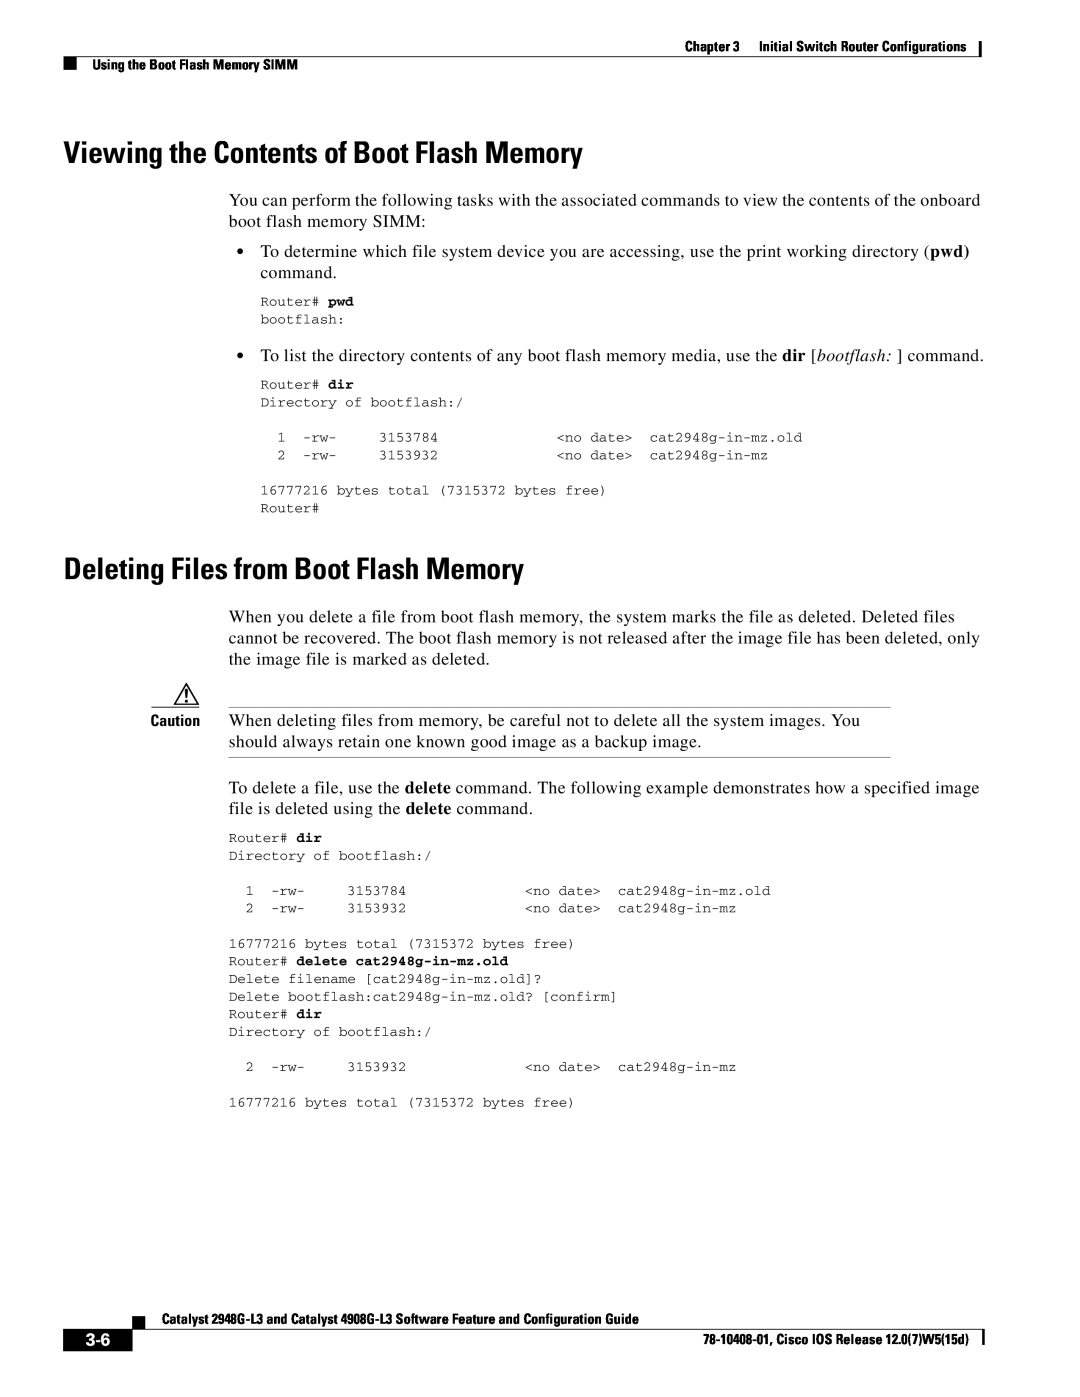 Cisco Systems 3 manual Viewing the Contents of Boot Flash Memory, Deleting Files from Boot Flash Memory 